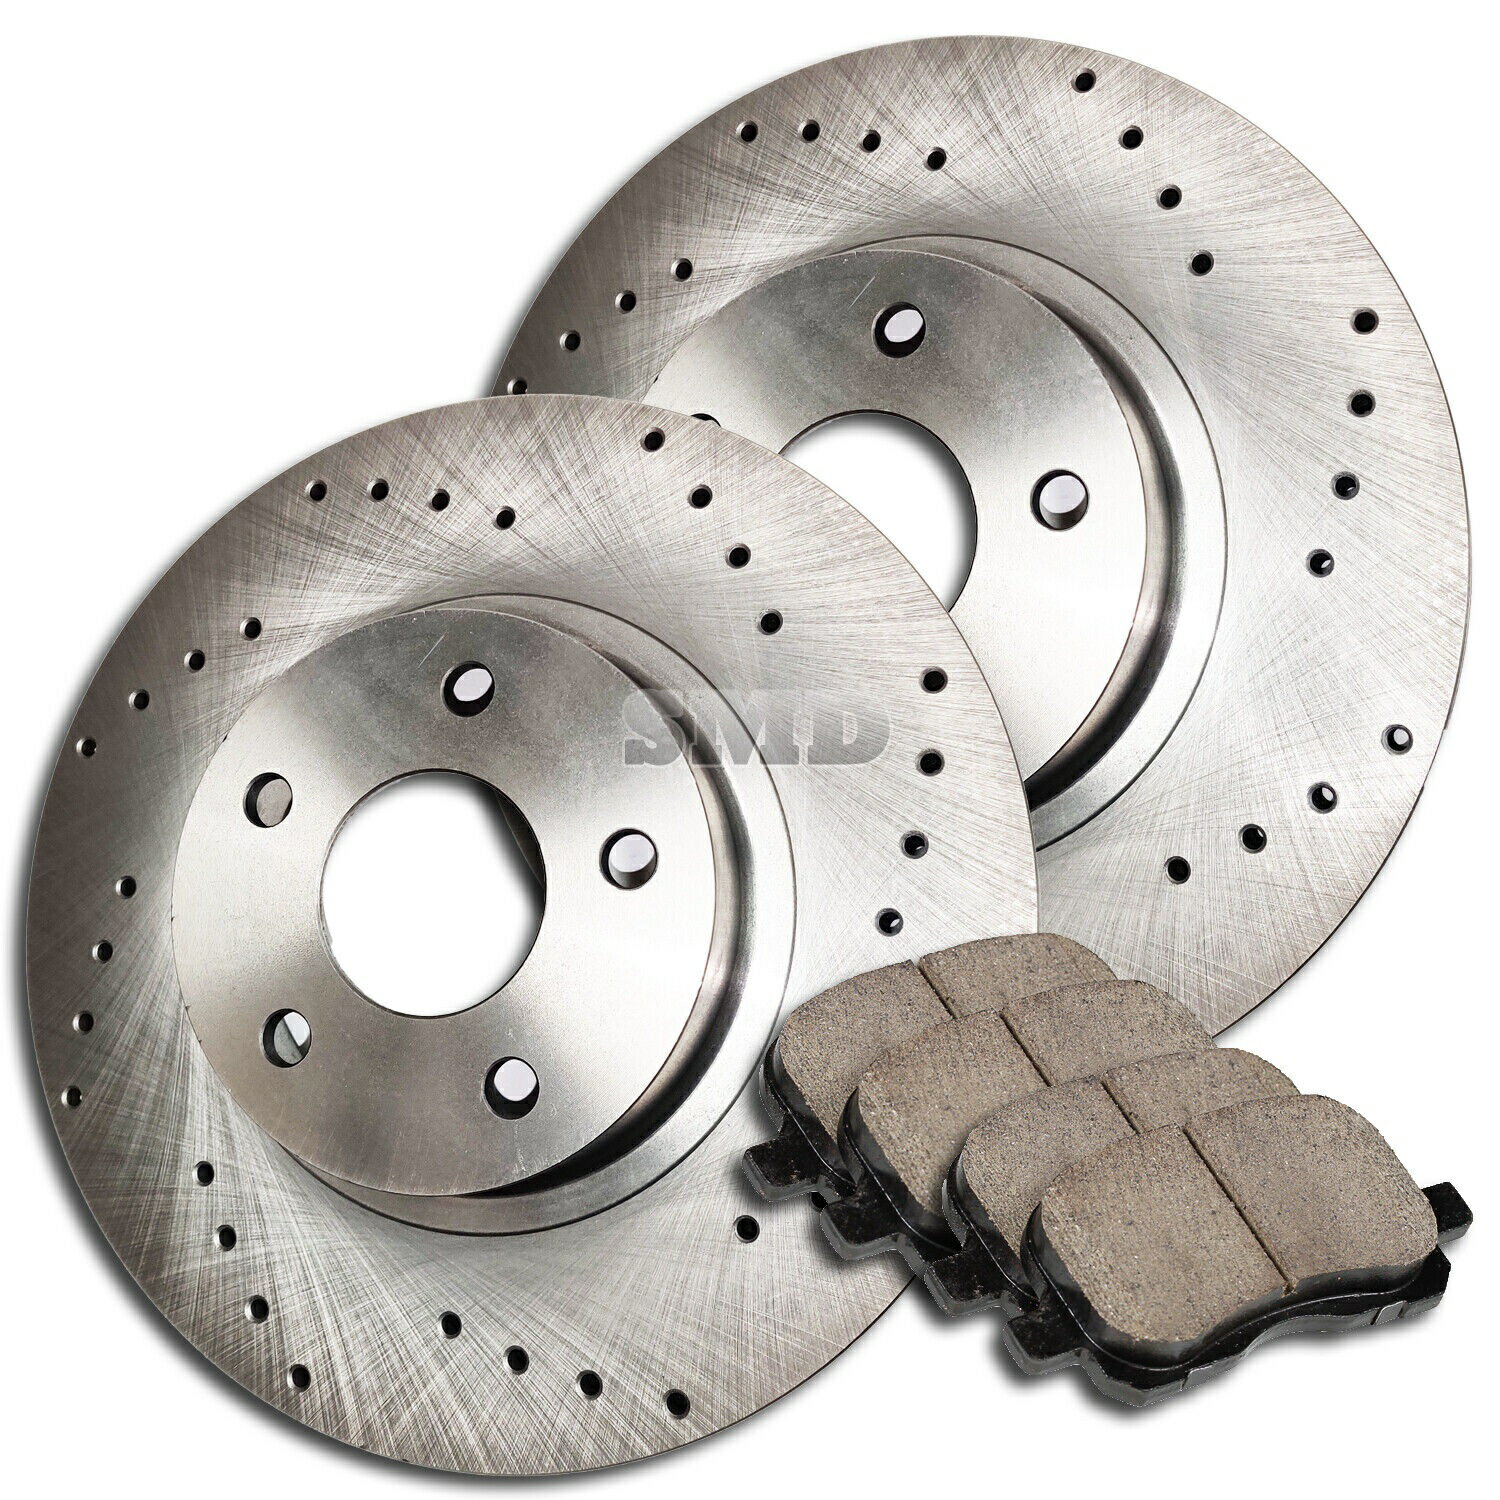 brake disc rotor BMW 535D/535D XDRIVE 14-16 A0839 FIT 2010 2011 Audi A6 Quattro 3.0L SuperCharged 321mm FRONT Rotors Pads